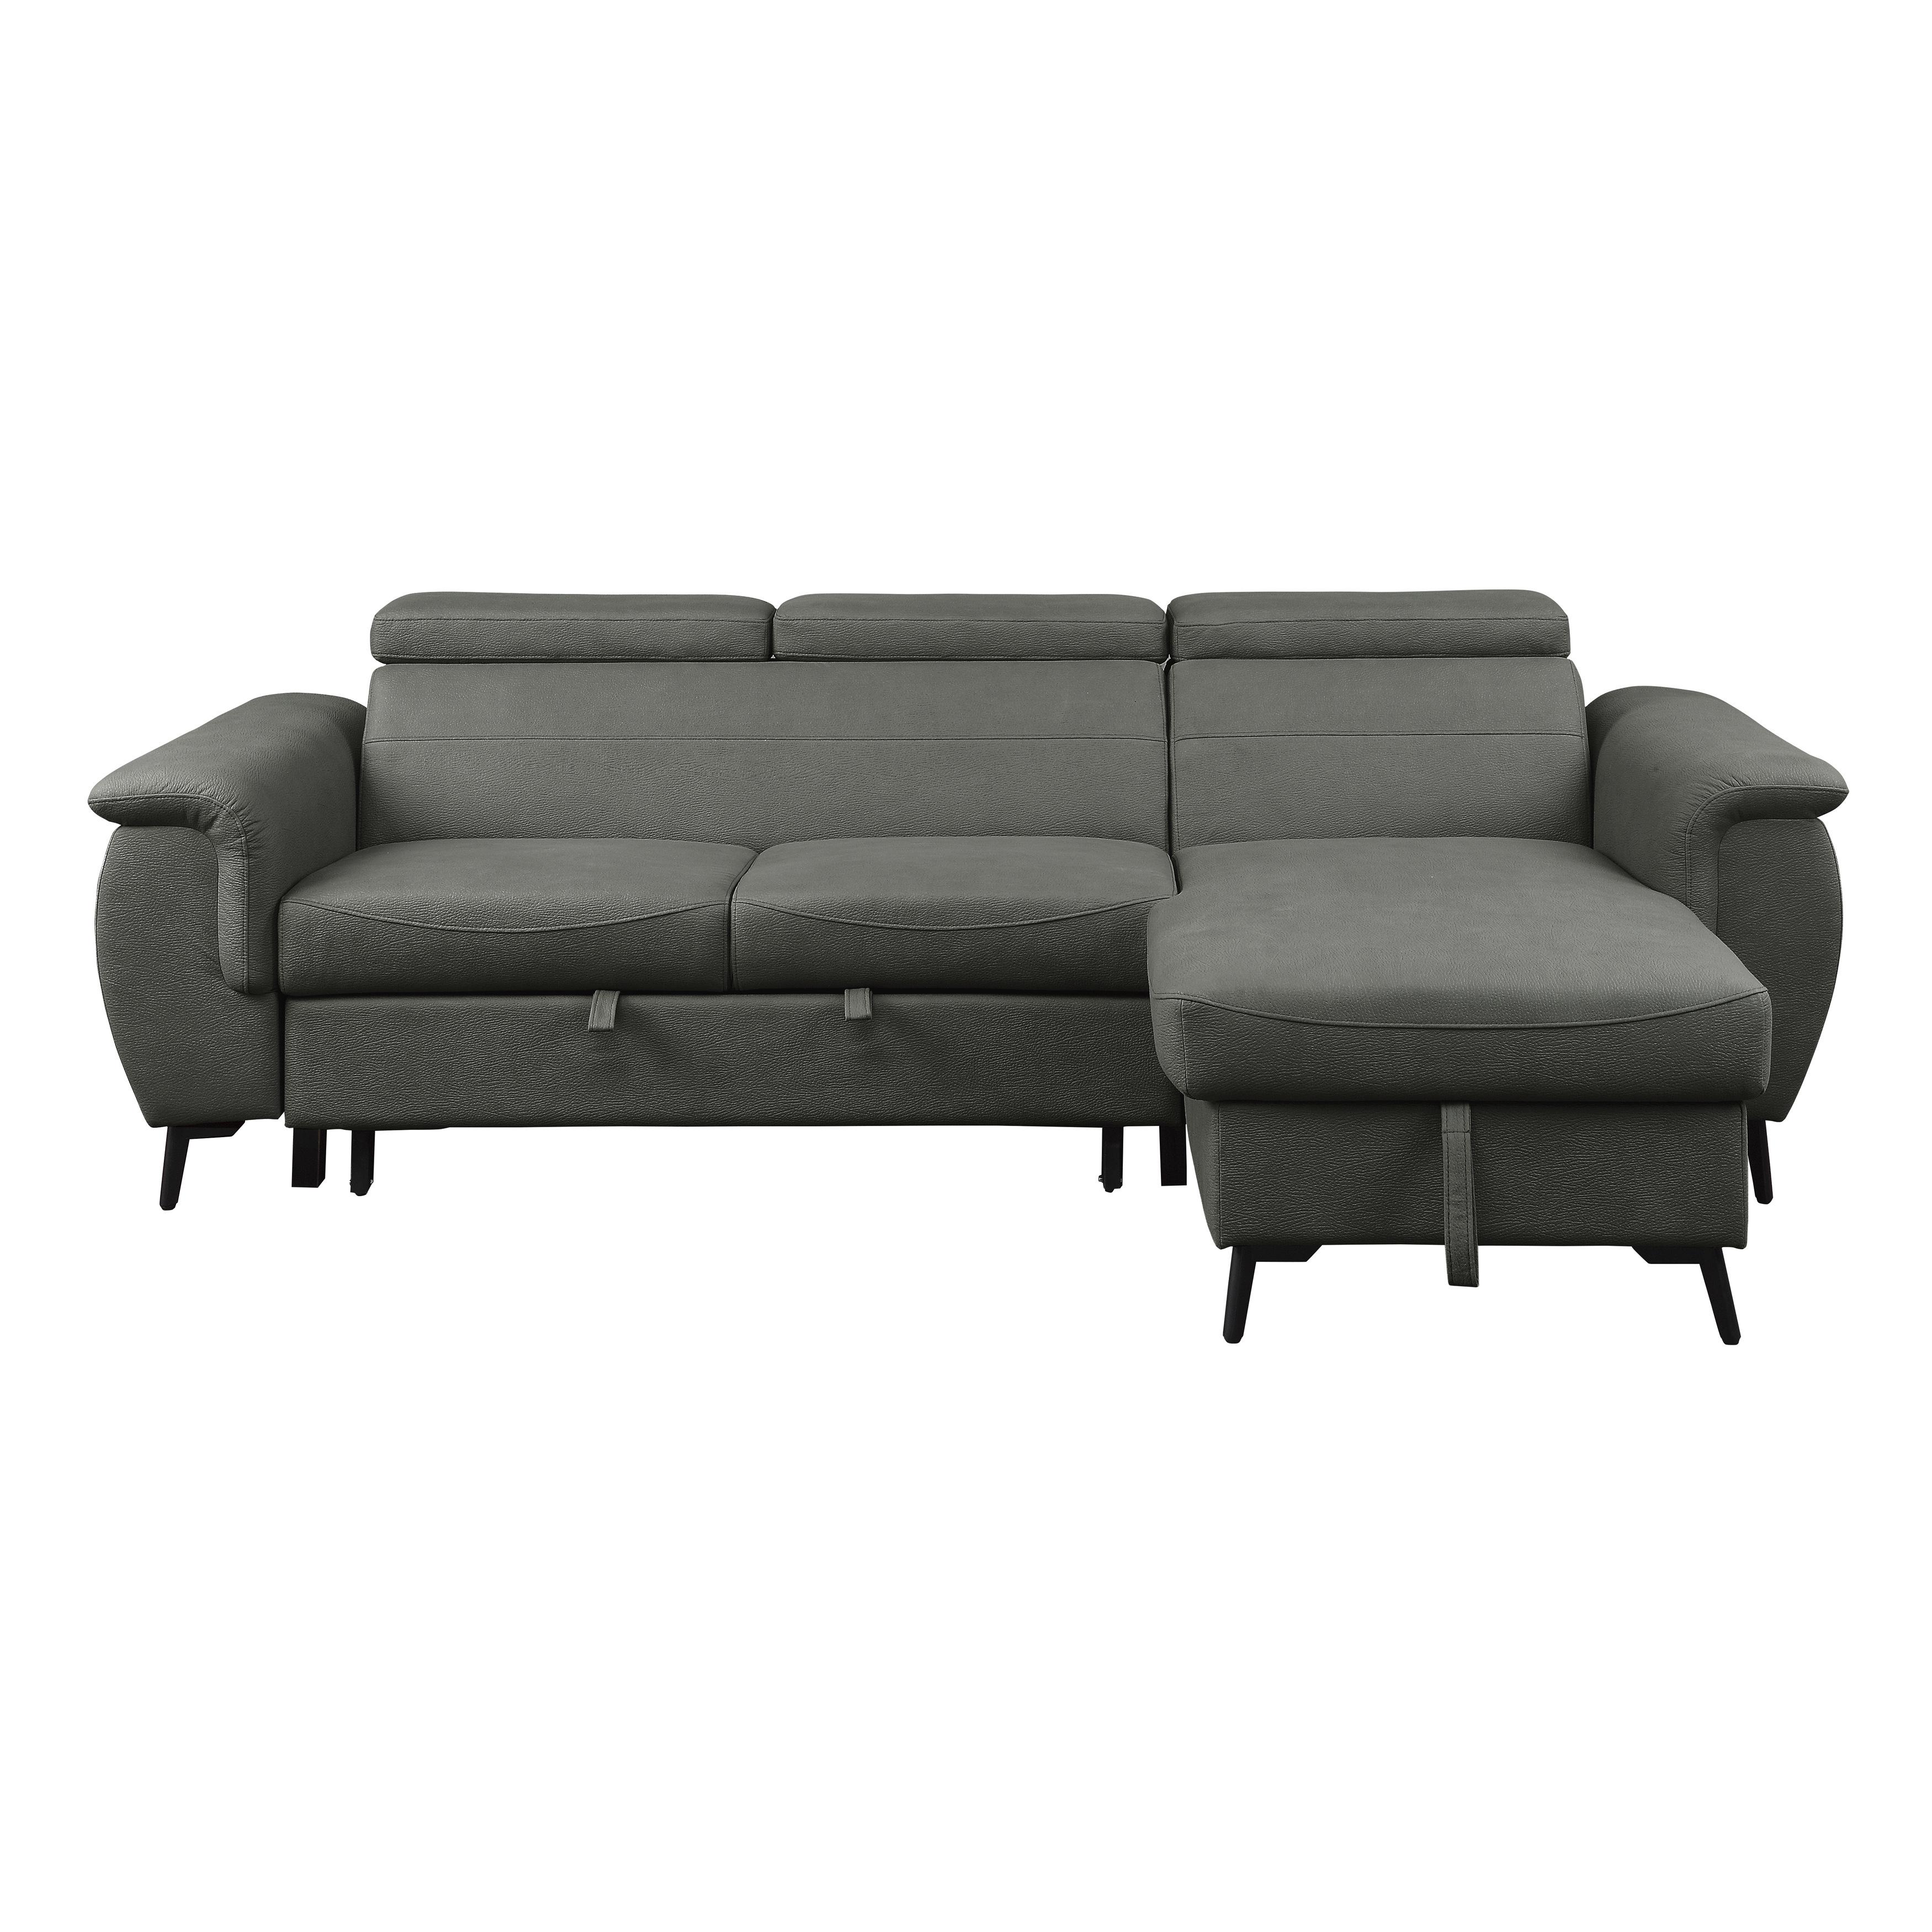 Modern Sectional Sofa 9403GY*SC Cadence 9403GY*SC in Gray Microfiber